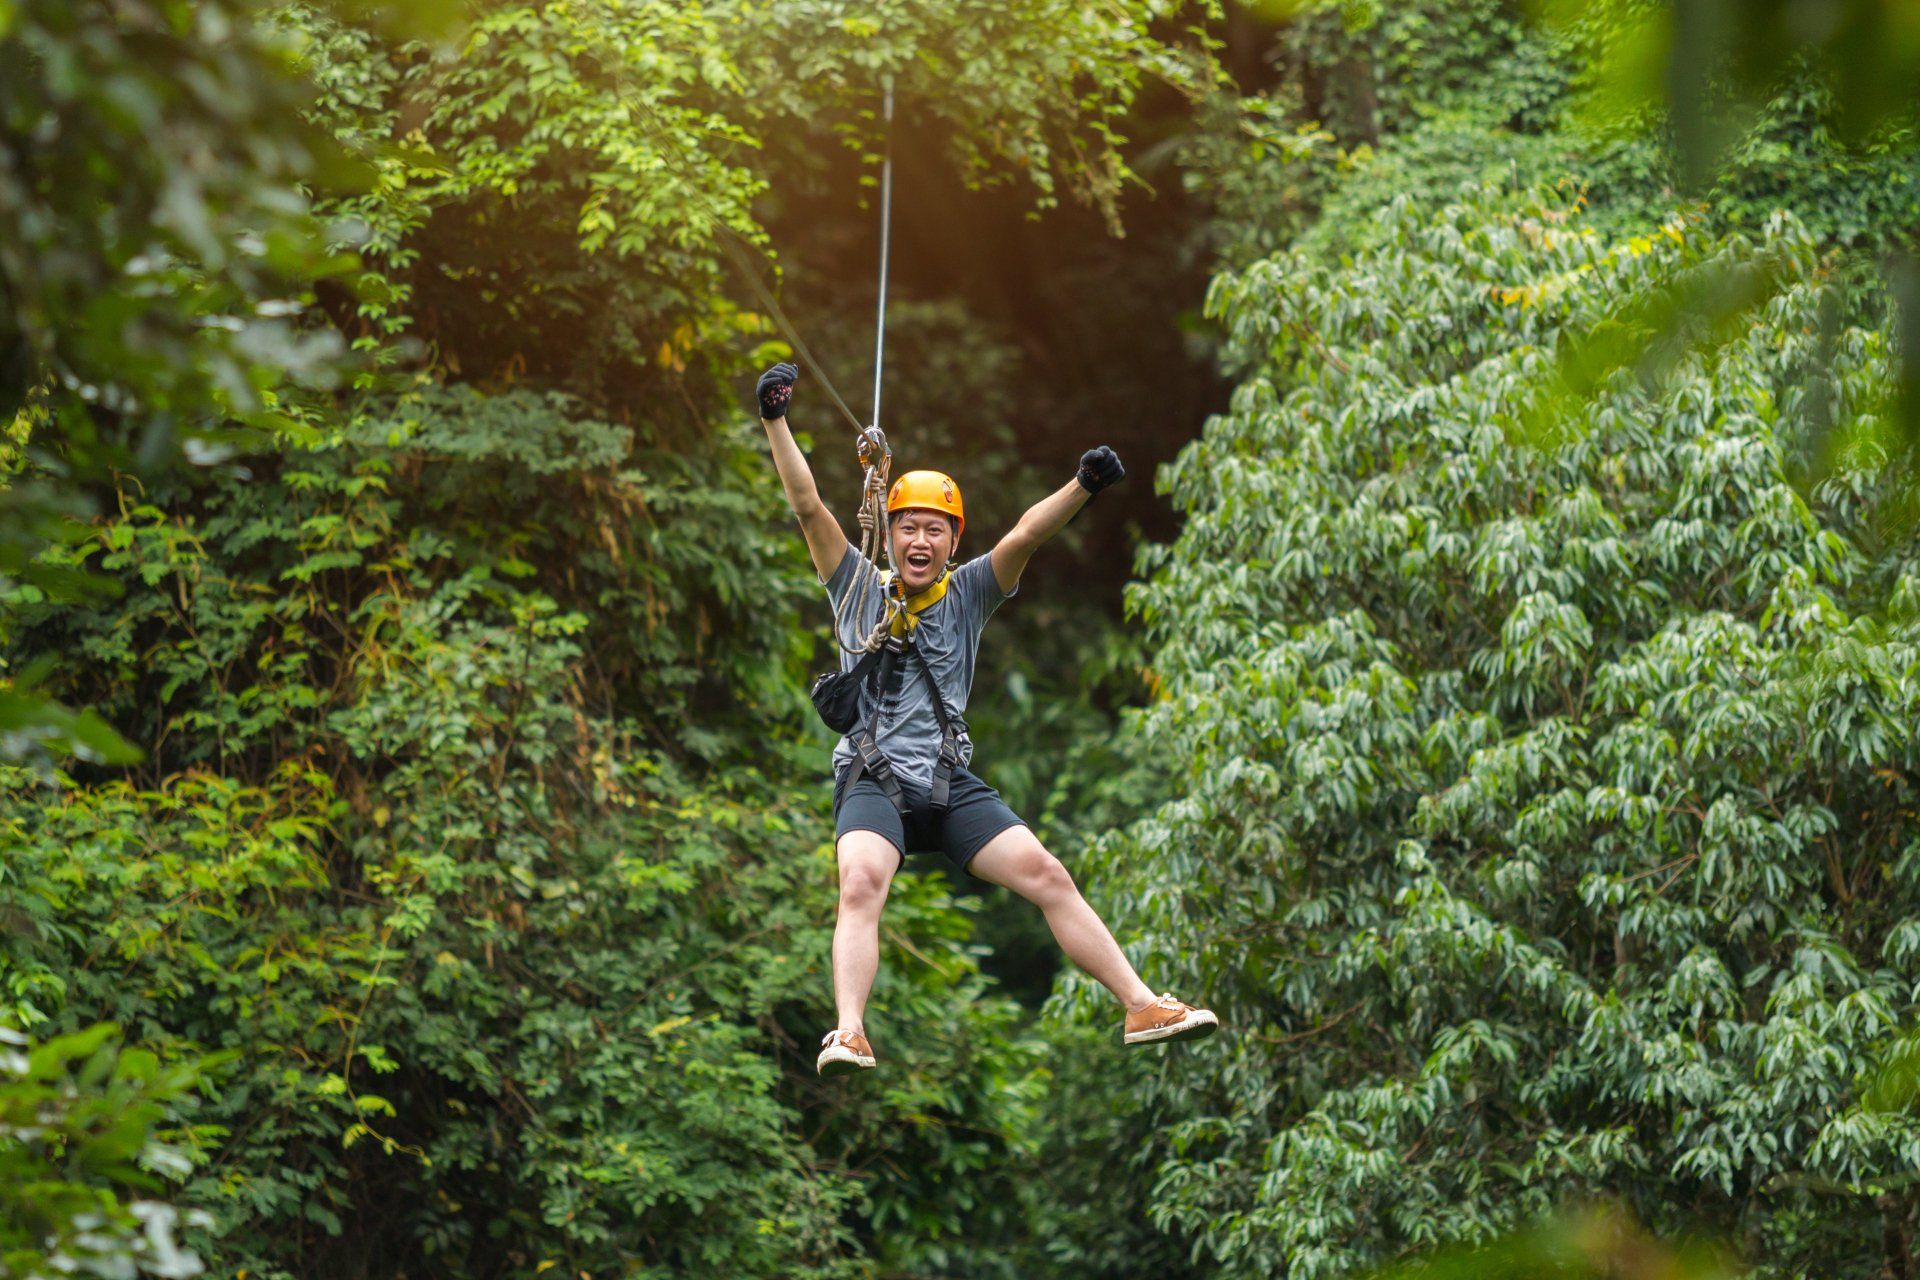 adrenaline junkie zip lining with his hands in the air and screaming of excitement